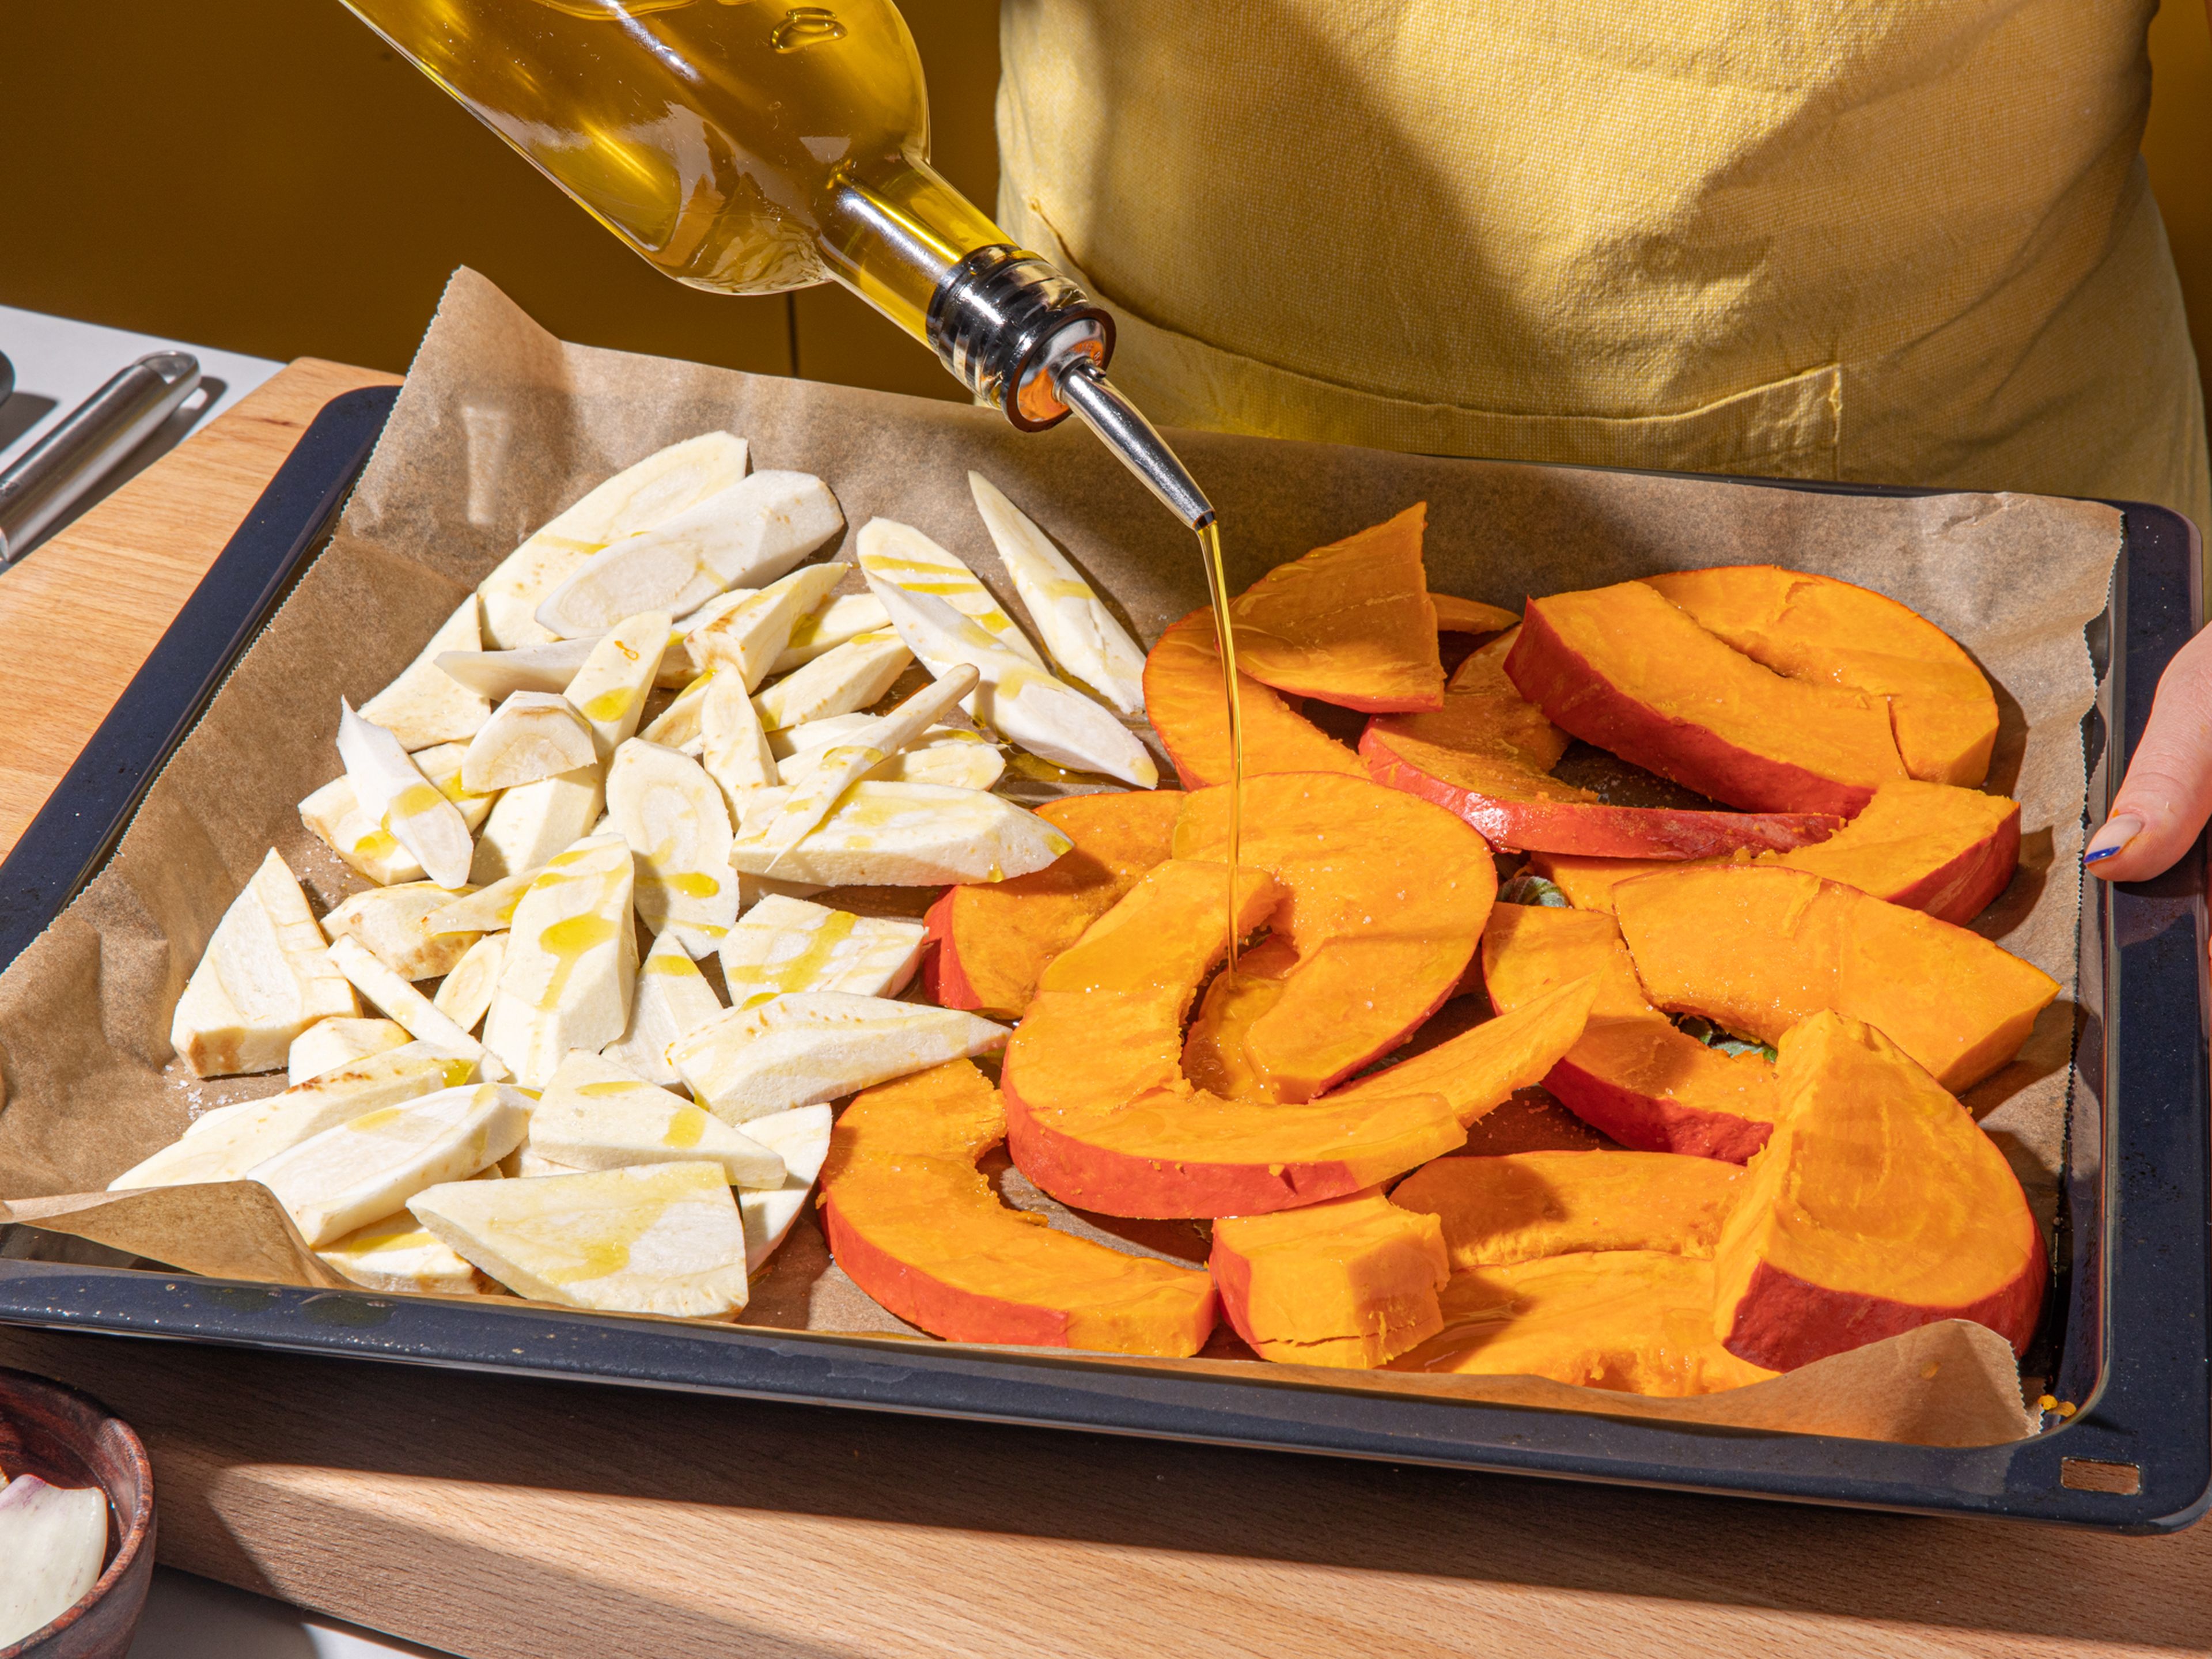 For the filling, preheat the oven to 200°C/400°F top/bottom heat. Remove the seeds from the pumpkin, then cut into wedges. Peel parsnips and slice. Spread sage on one half of a parchment-lined baking sheet, and place the pumpkin on top. Spread the parsnips on the other side, season with salt and drizzle with olive oil. Bake in the preheated oven for approx. 40 min.